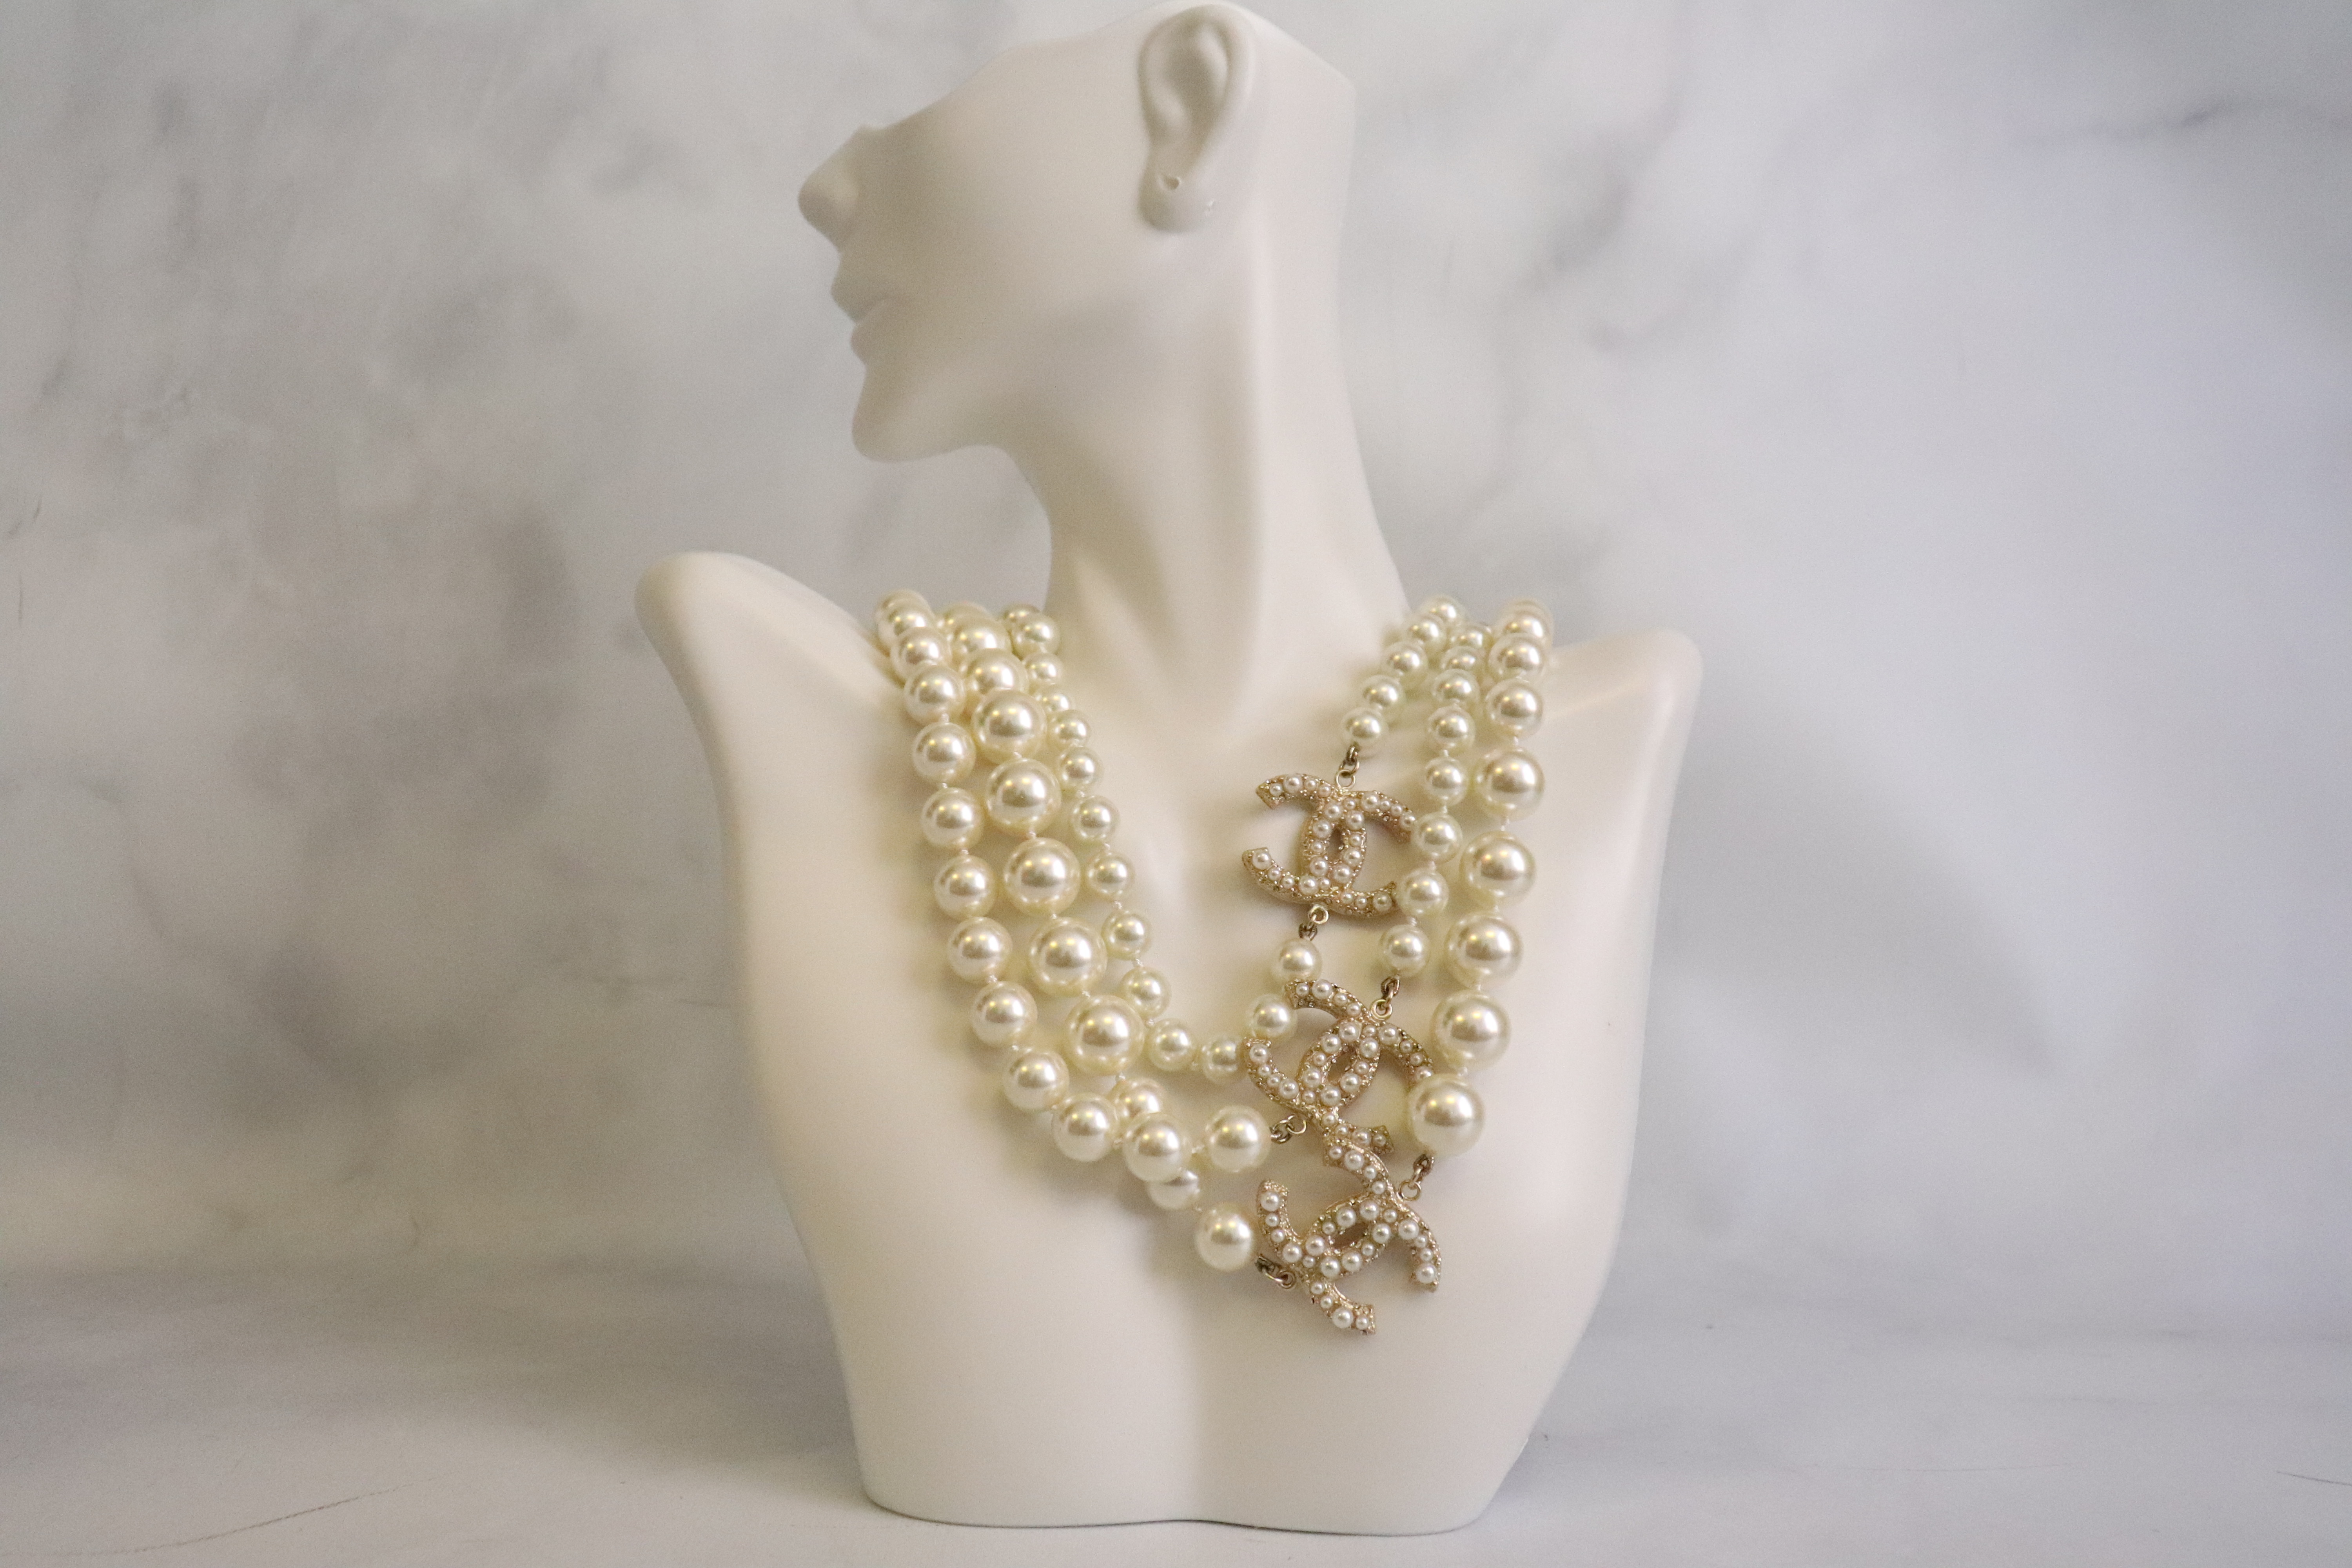 Chanel Necklace, Pearl, 100 year Anniversary Special, Preowned in Box